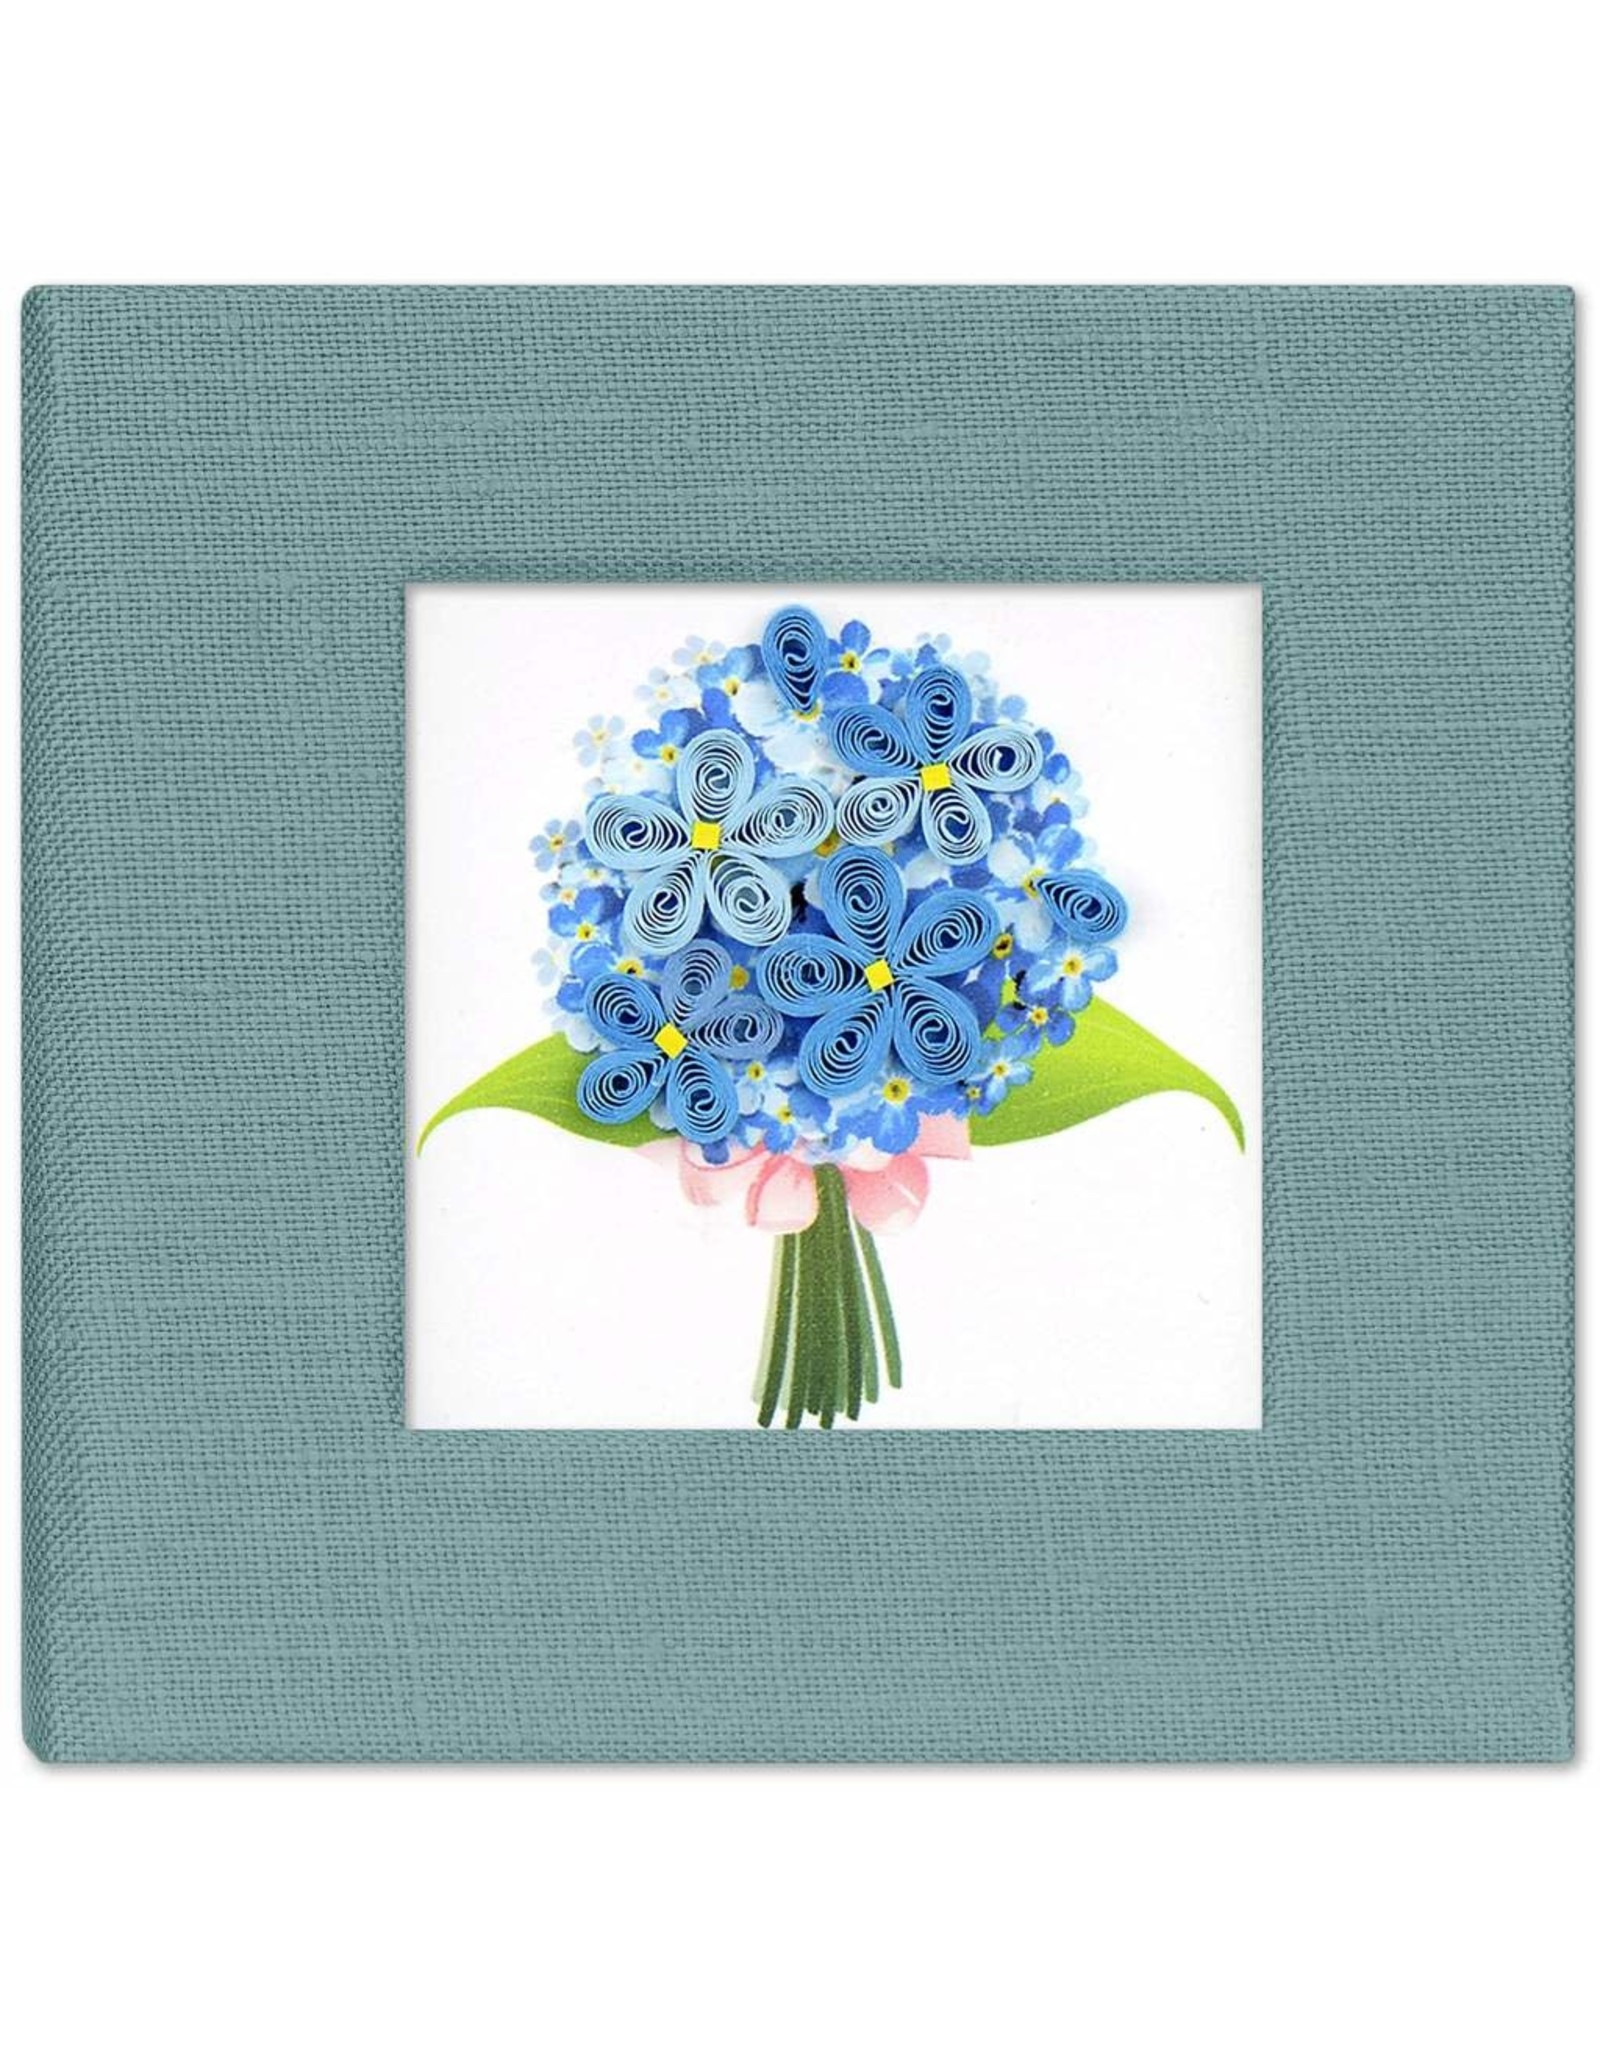 Trade roots Quilled  Post It Notes Cover, Blue Hydrangea, Vietnam